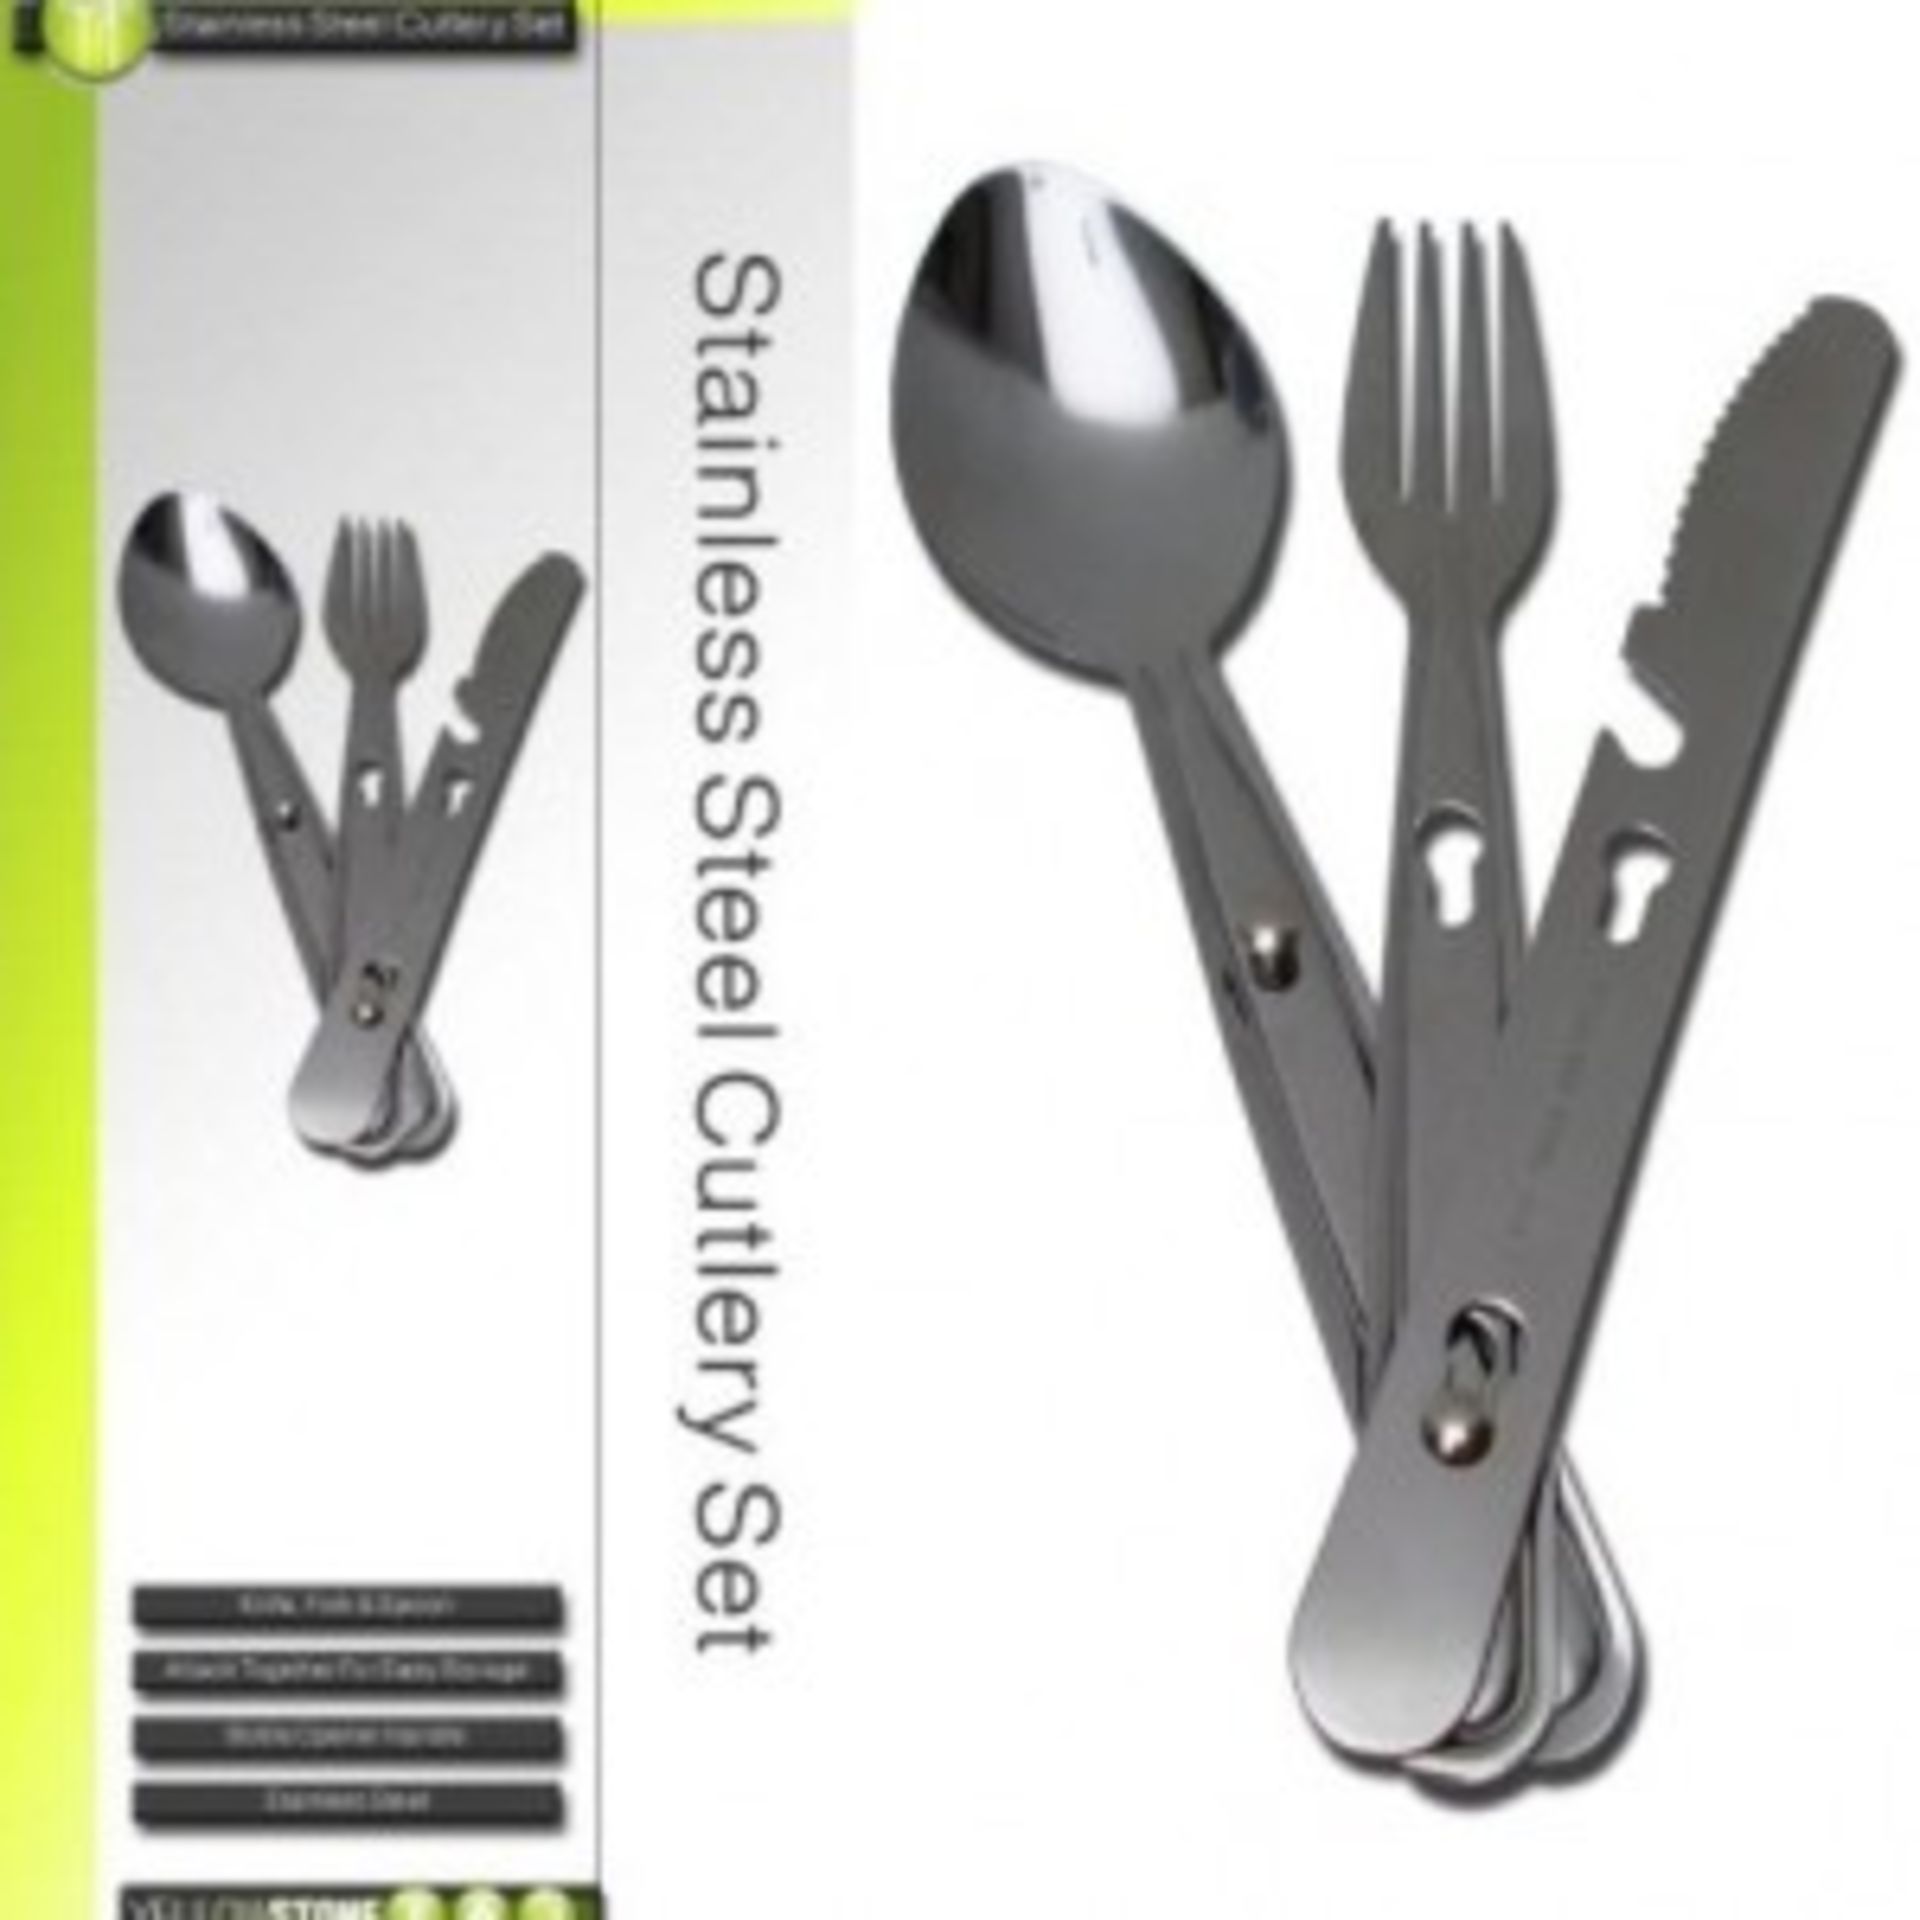 V *TRADE QTY* Brand New Four Stainless Steel Folding Cutlery Sets X 6 YOUR BID PRICE TO BE